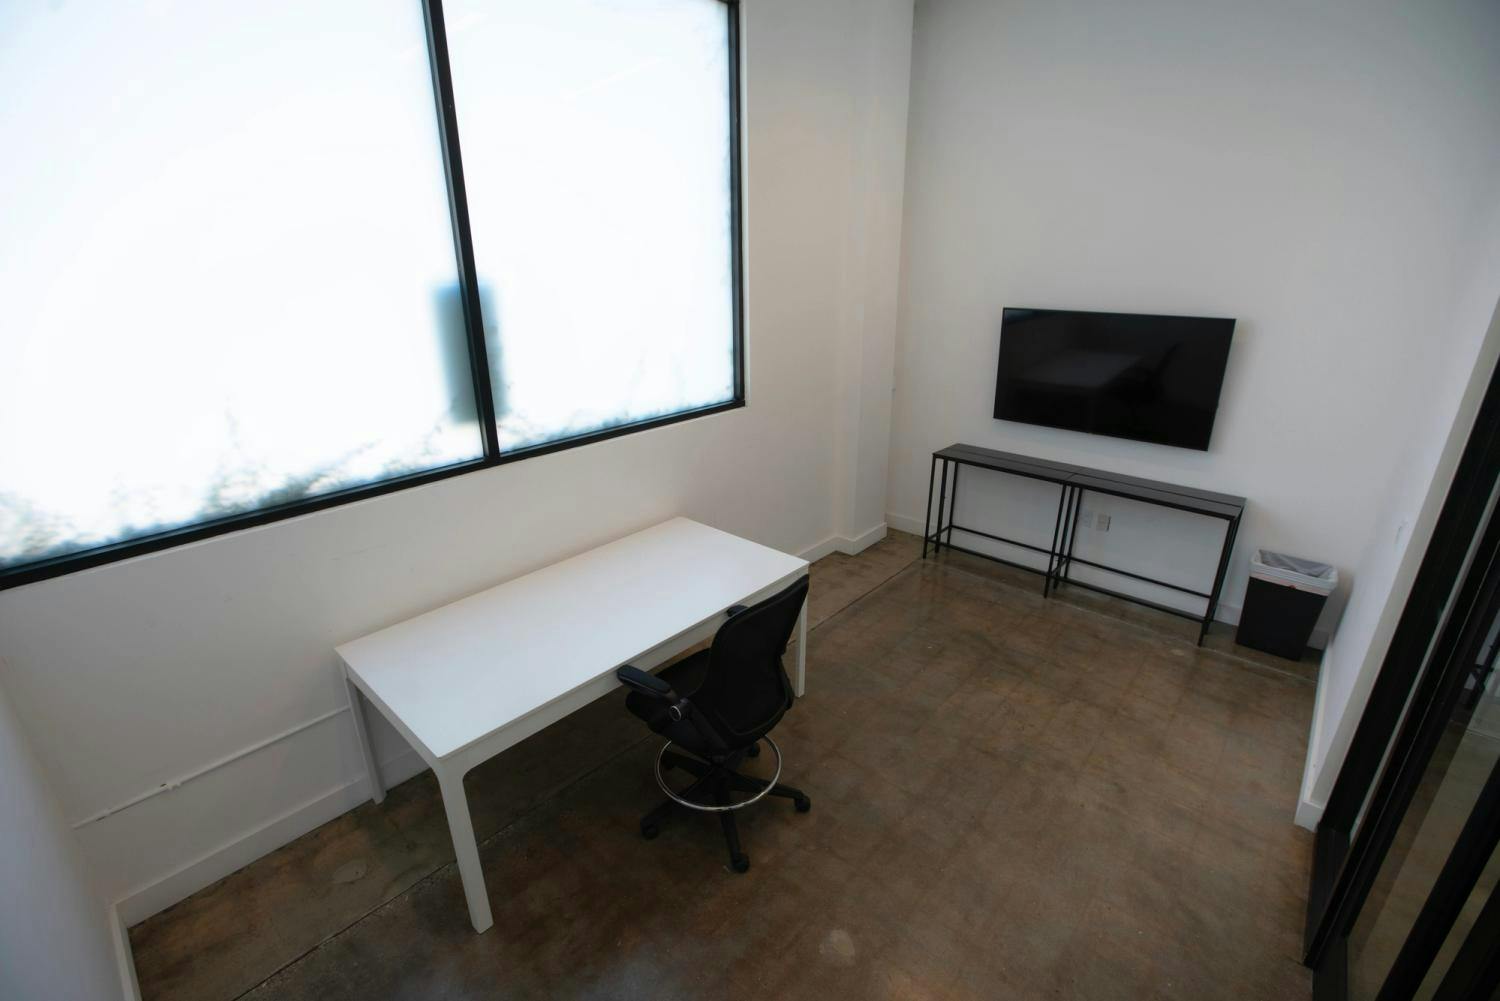 A minimalist workspace with a white desk and chair, a flat-screen TV on the wall, and a large window filling the room with natural light.